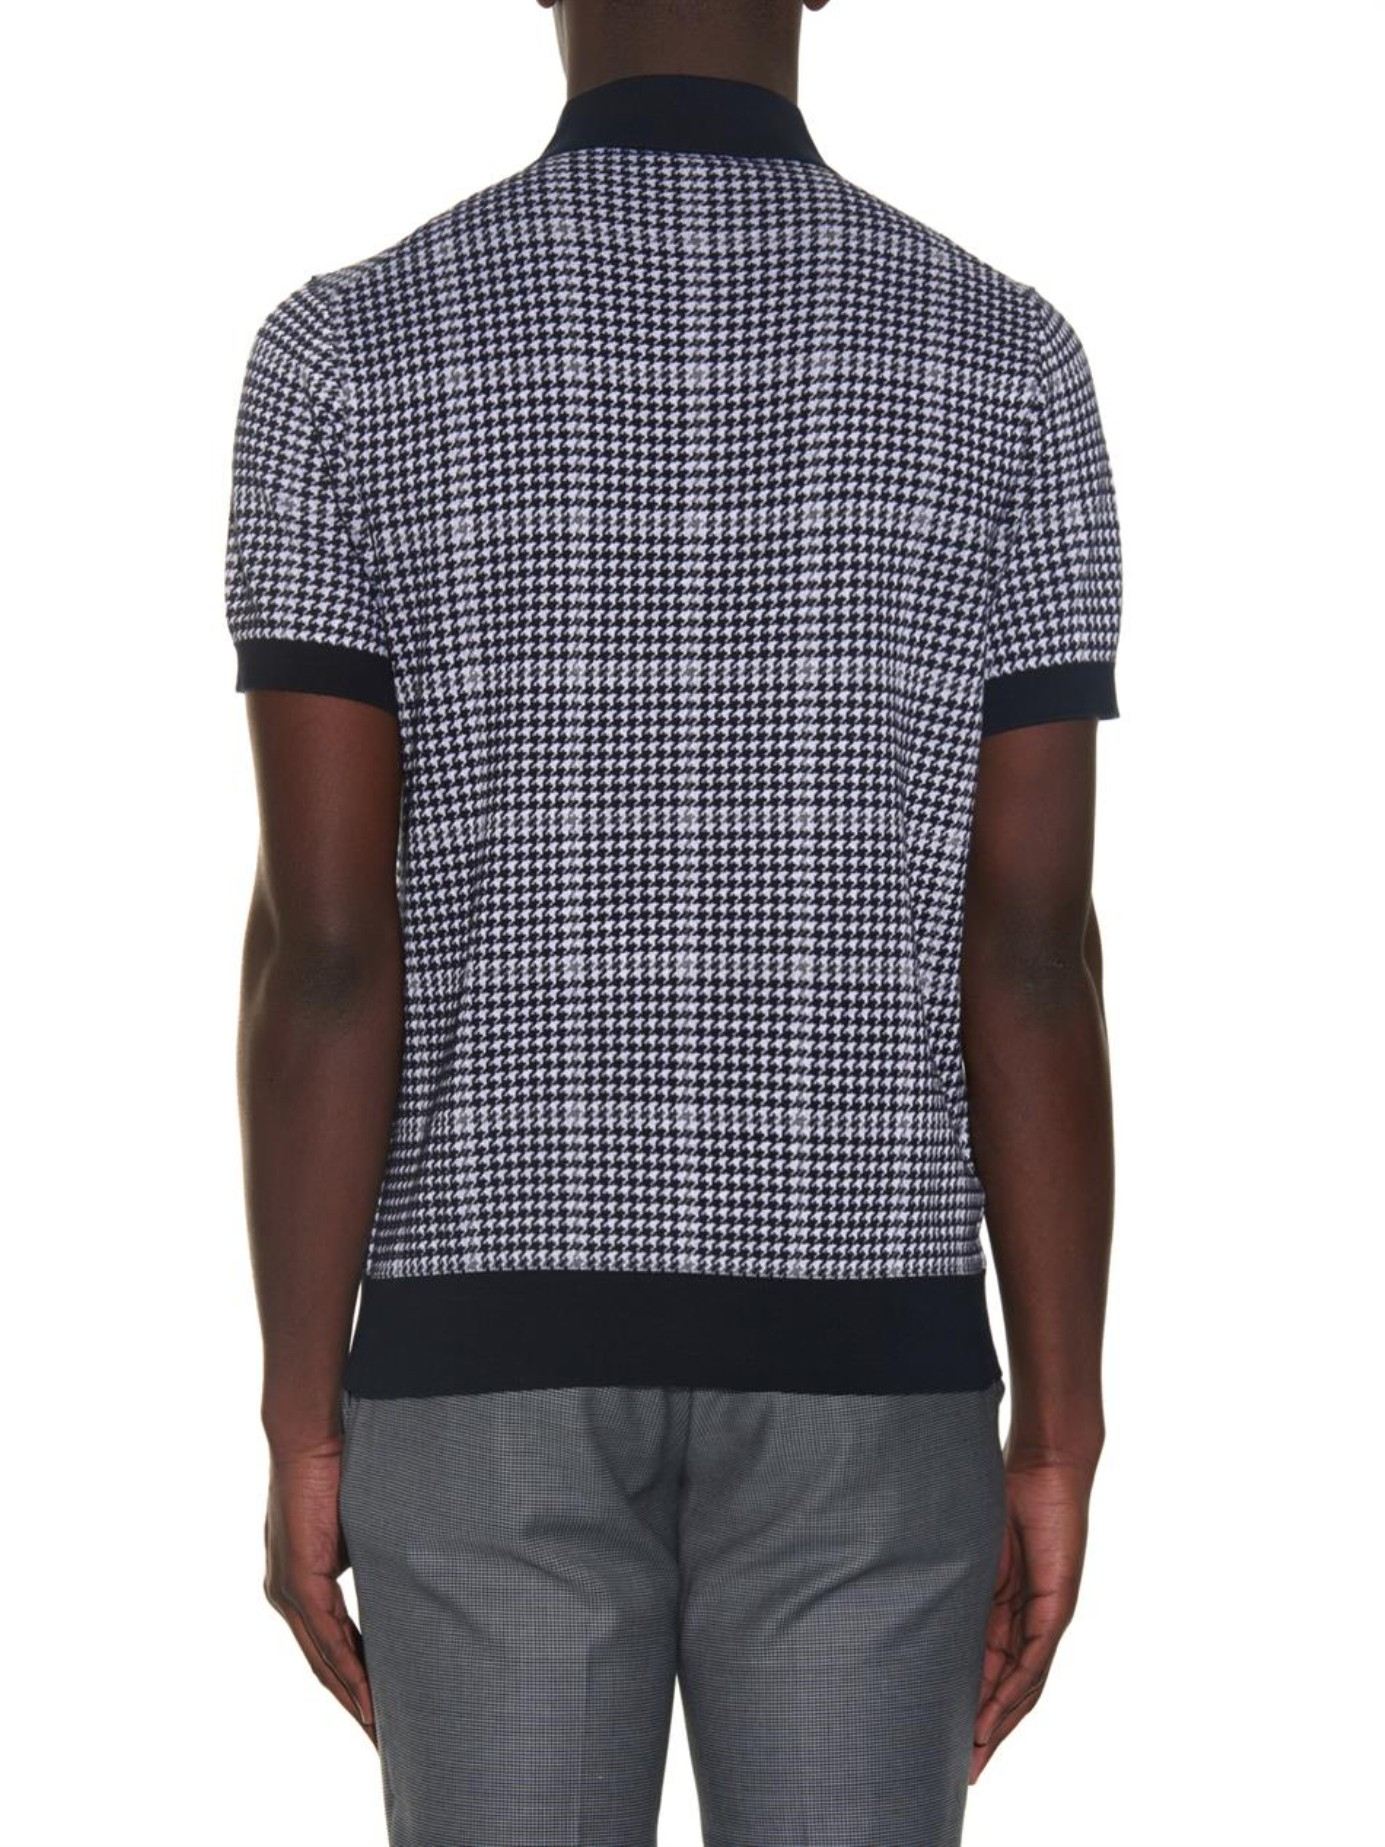 Lyst - Brioni Houndstooth Knitted Polo Shirt in Blue for Men